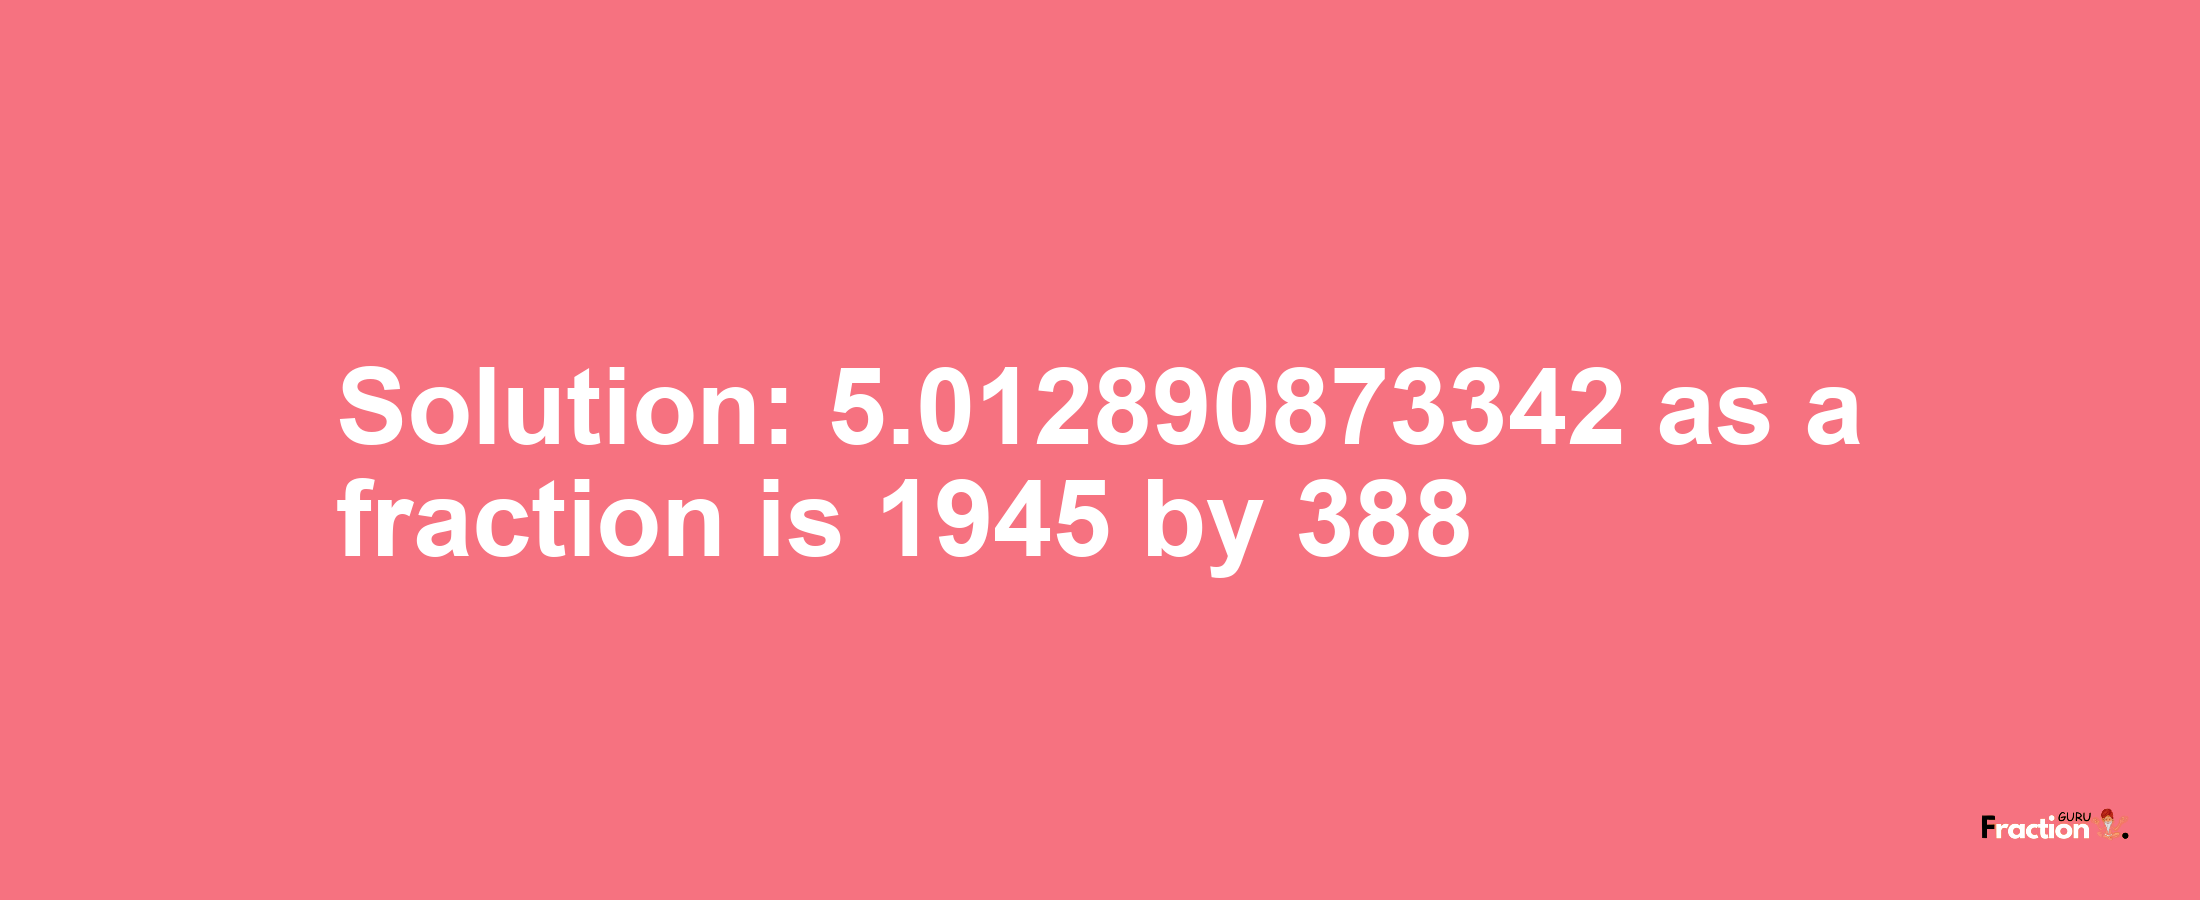 Solution:5.012890873342 as a fraction is 1945/388